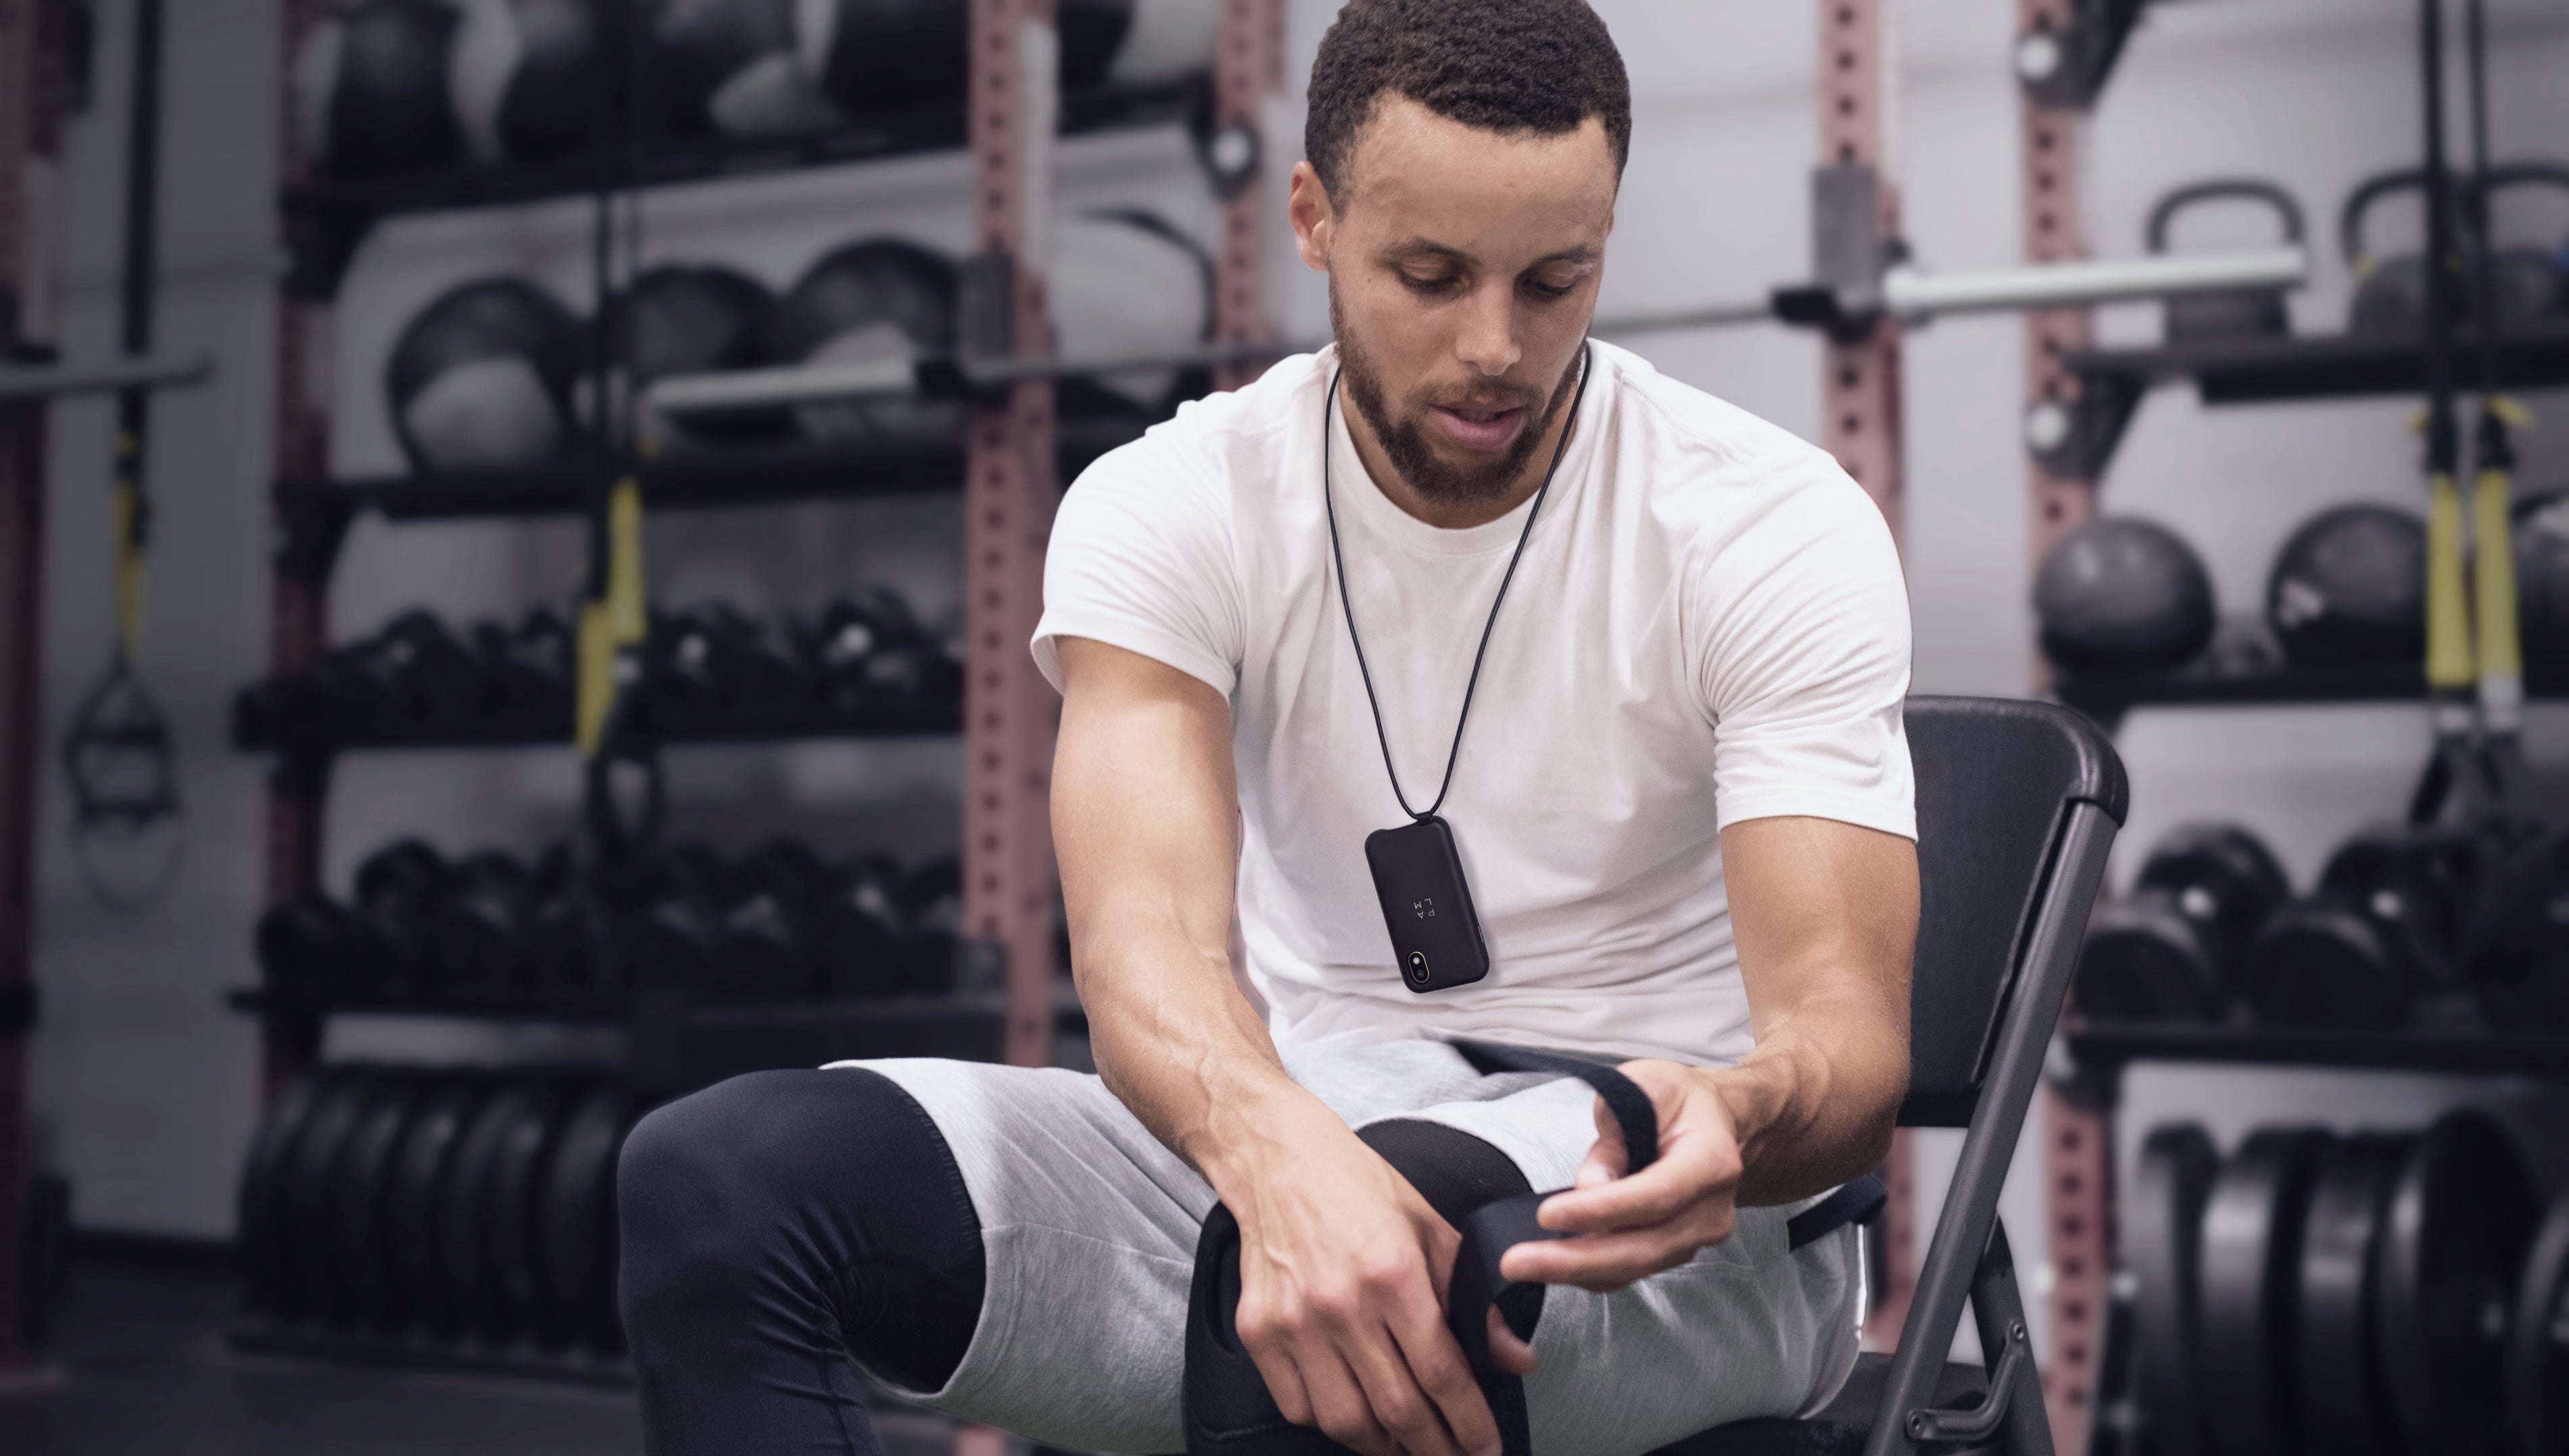 Stephen Curry wears a Palm smartphone in a lanyard case